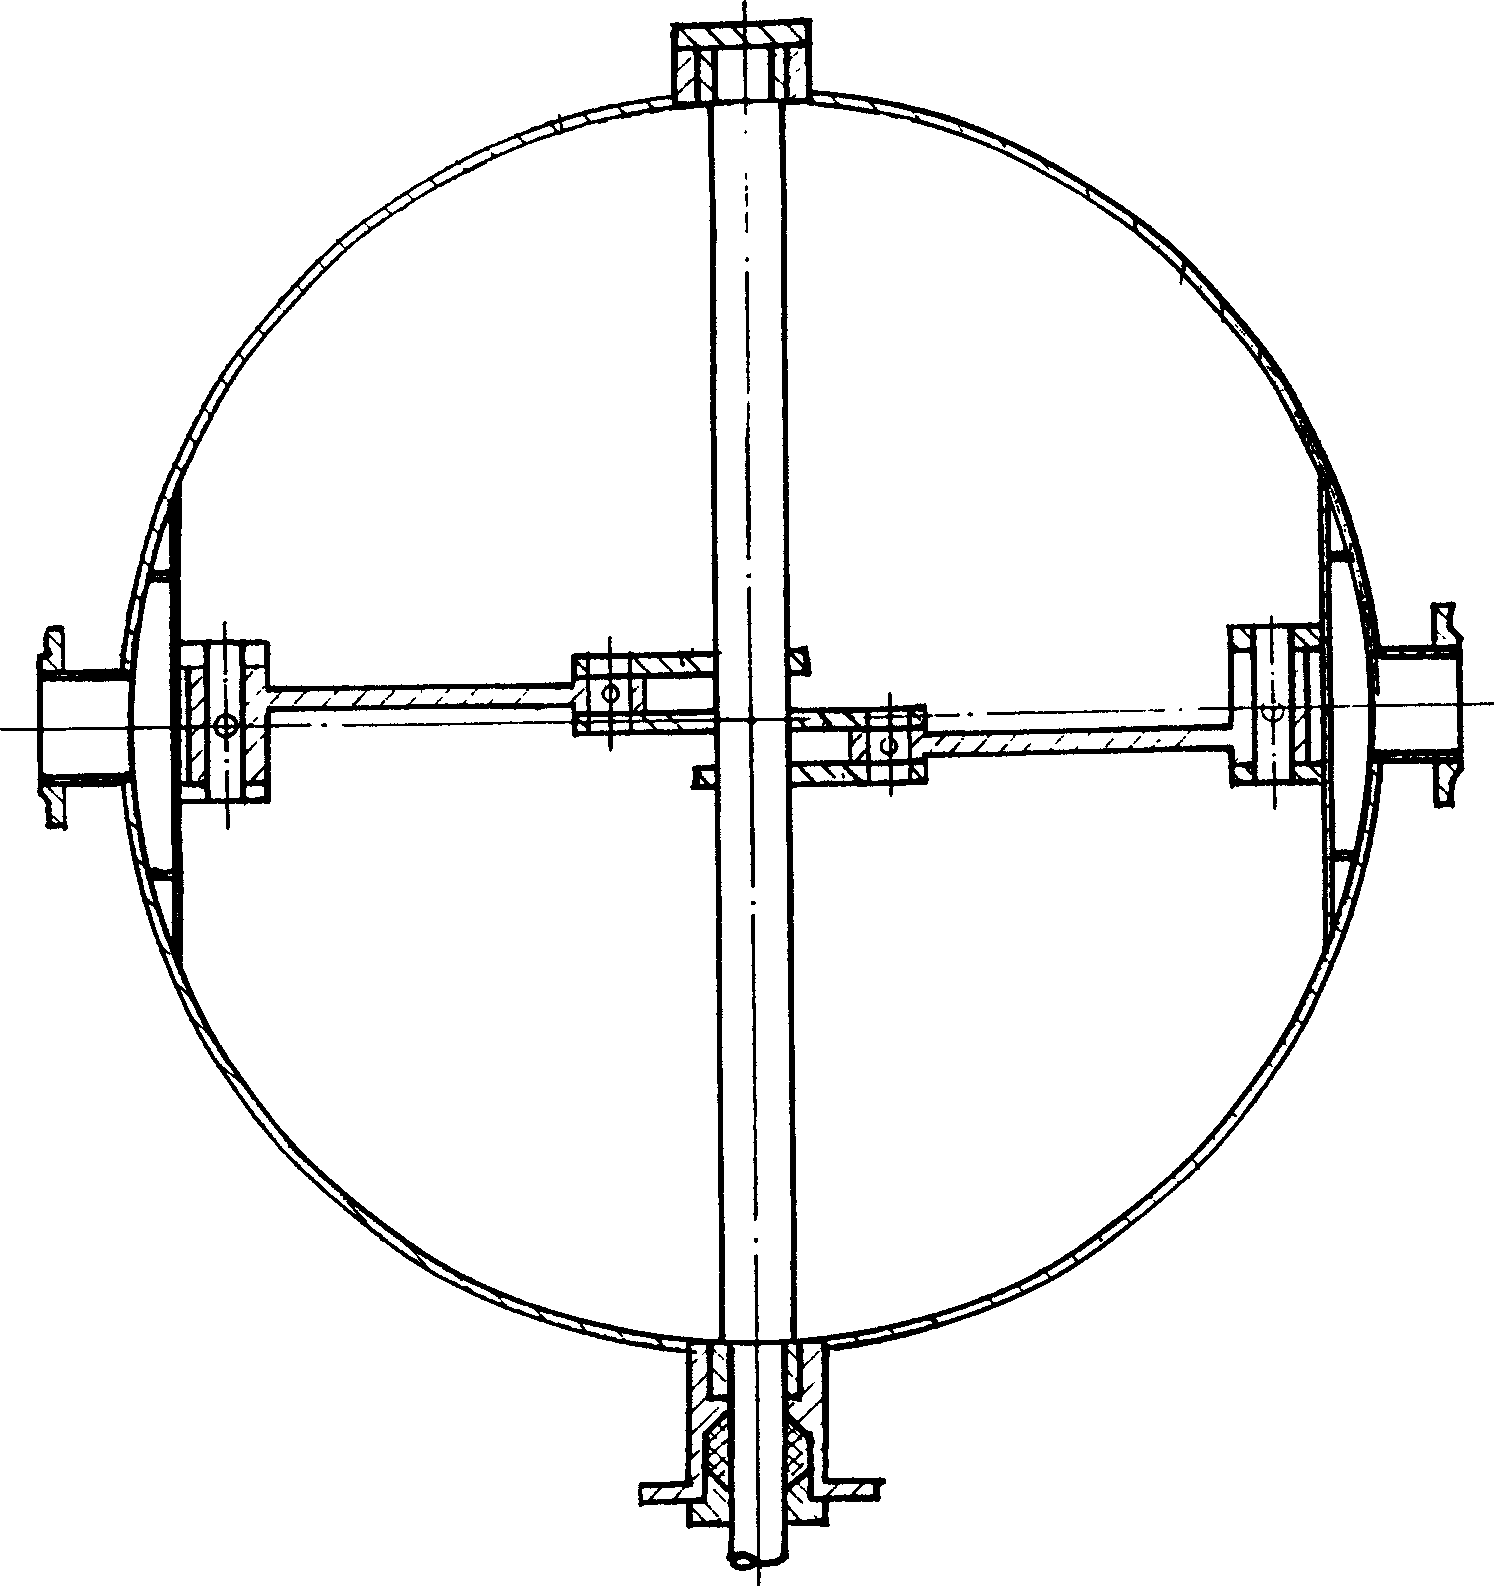 Crank connecting rod type ball net drawing device